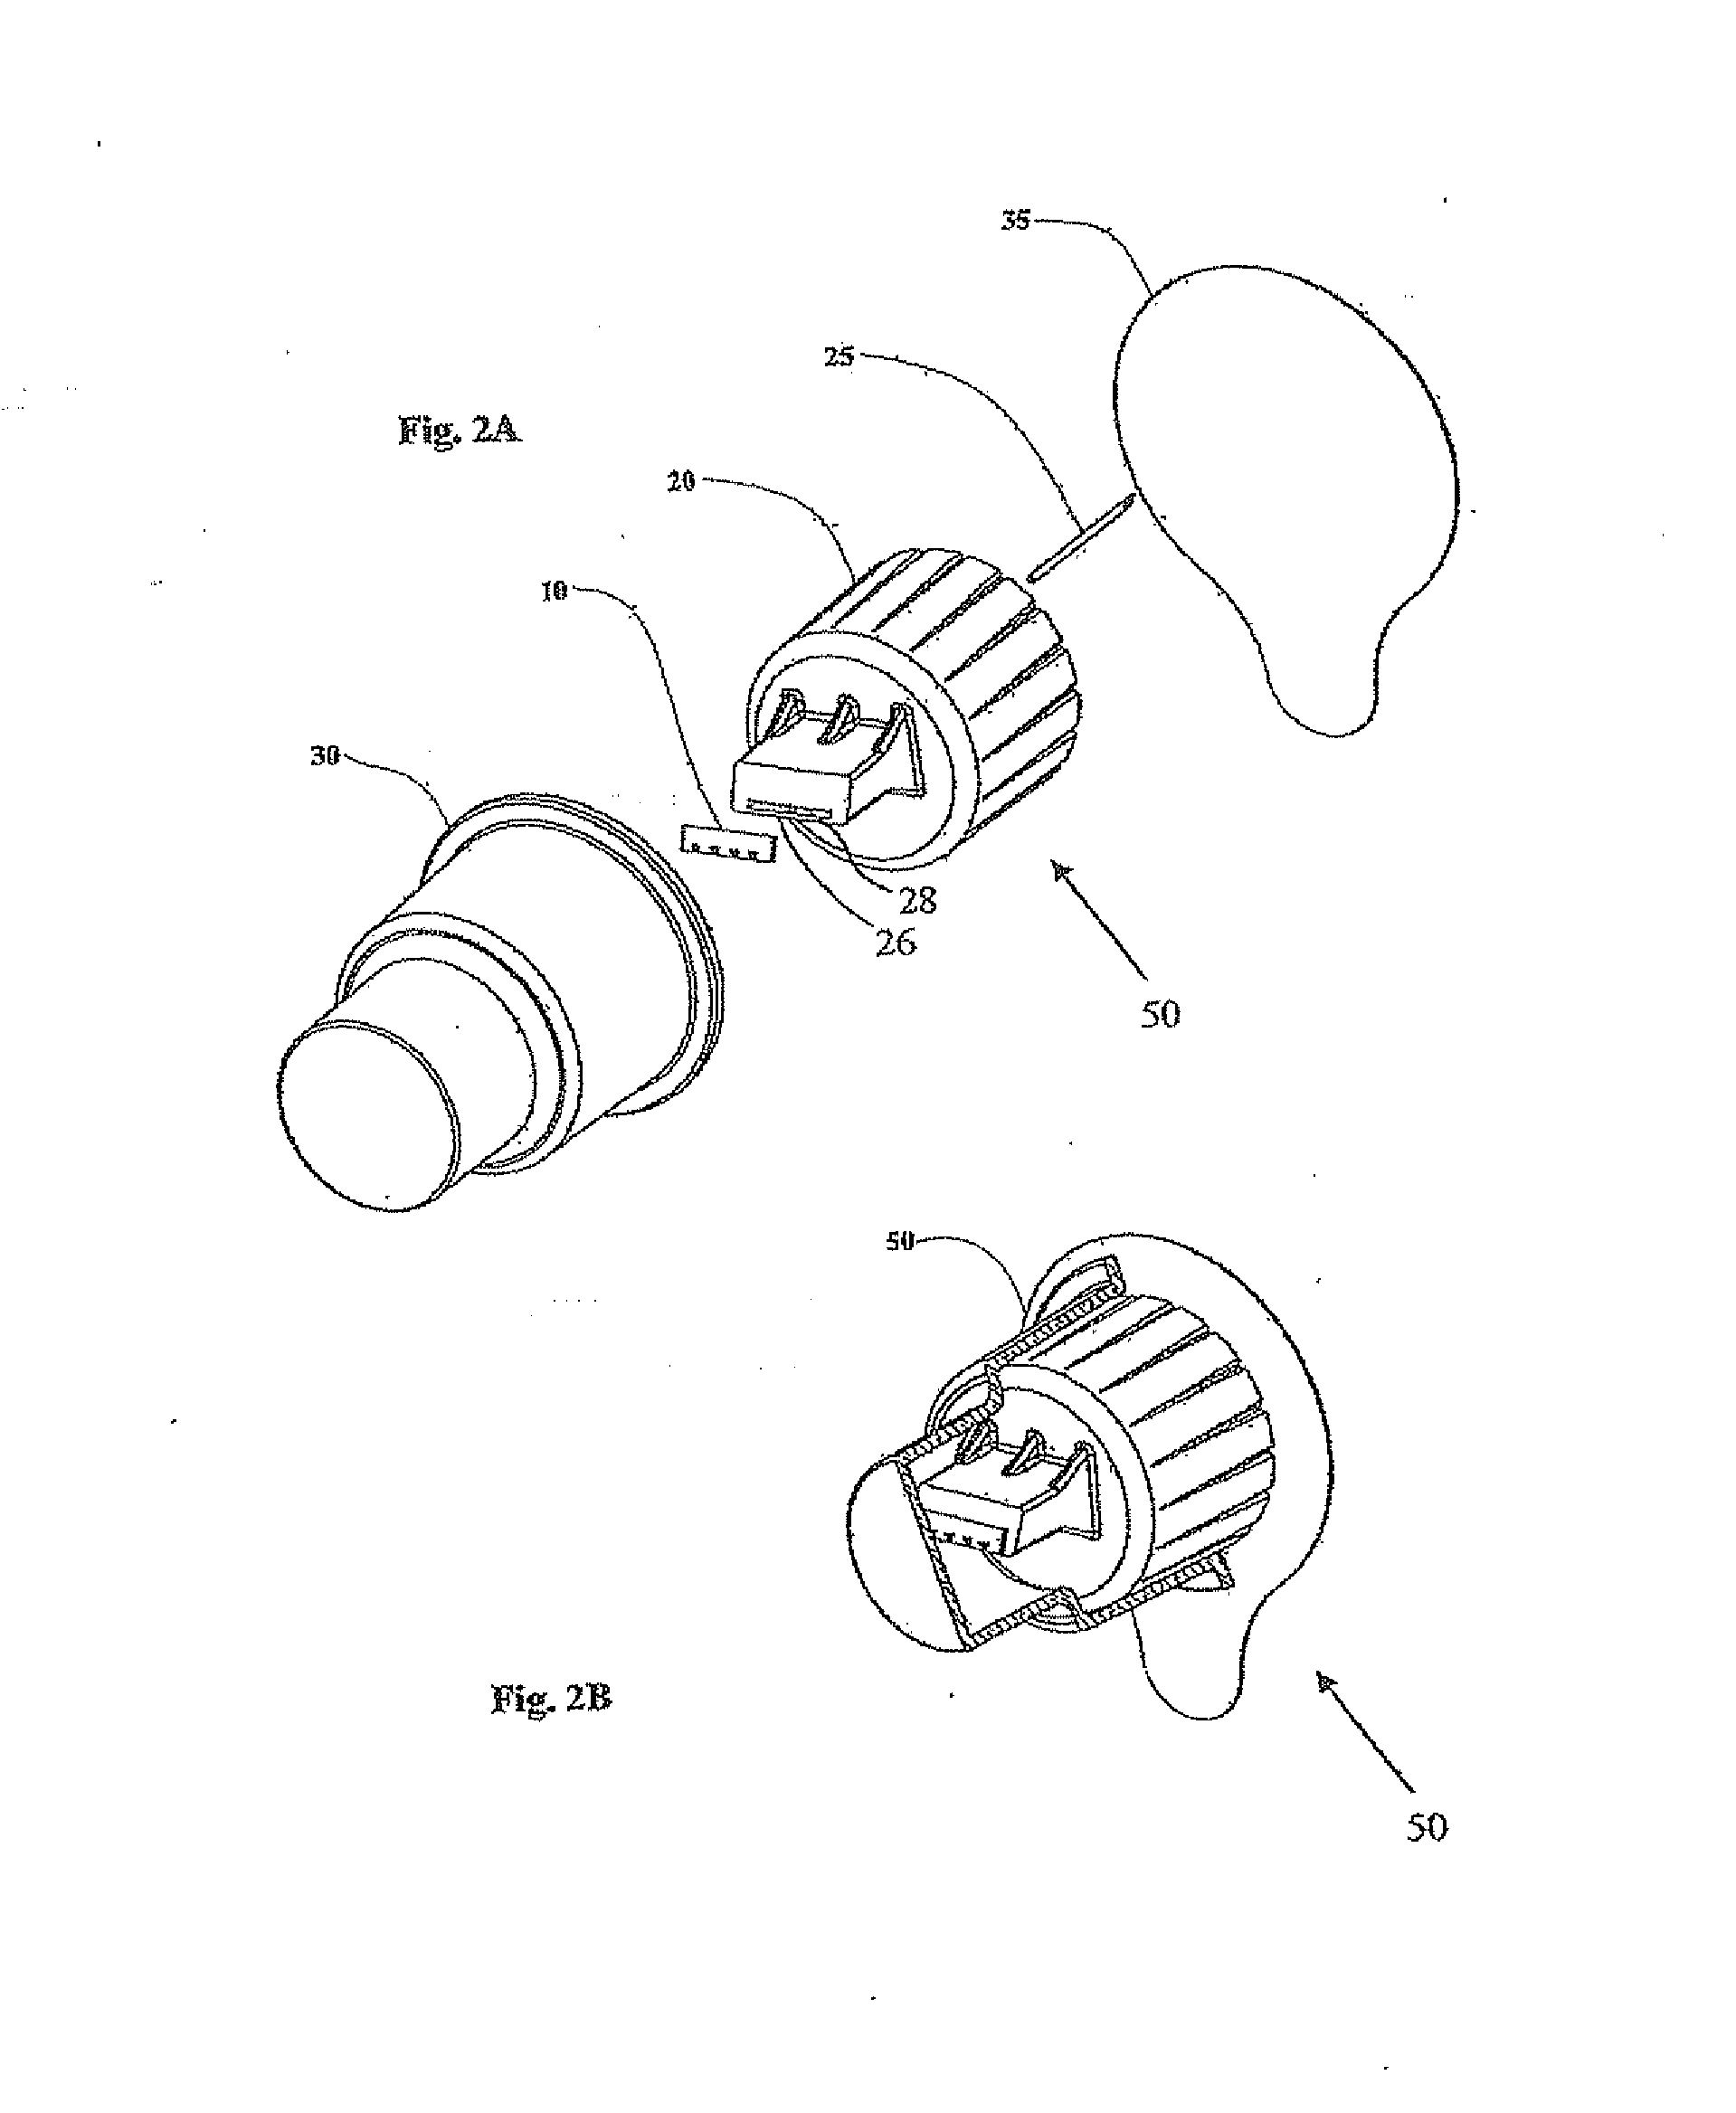 Microneedle adapter for dosed drug delivery devices